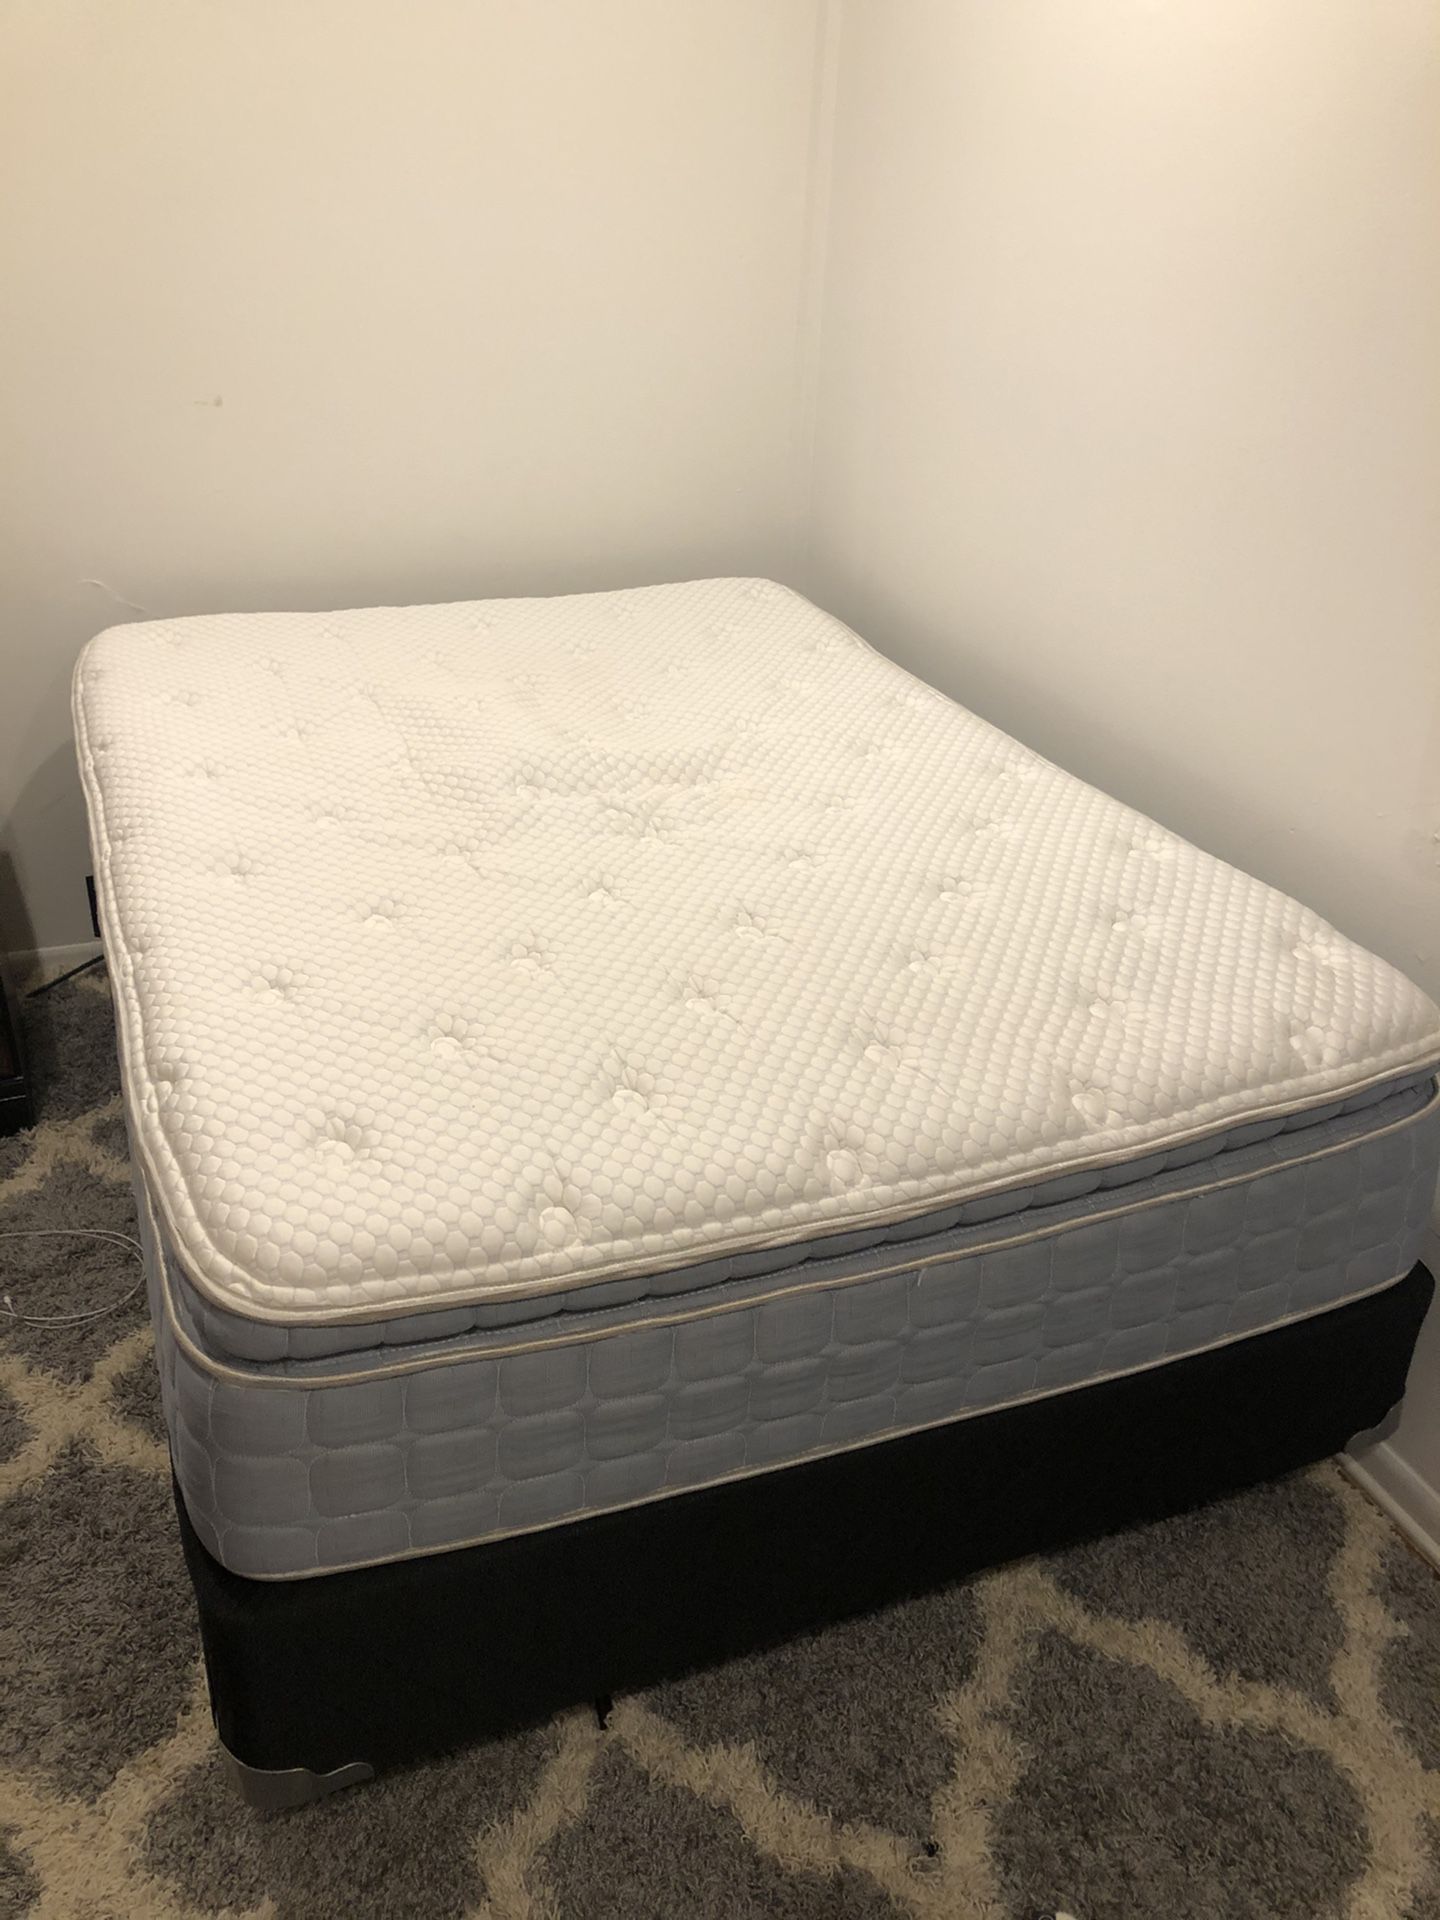 Full Size Mattress and Bed Frame with stay cool topper